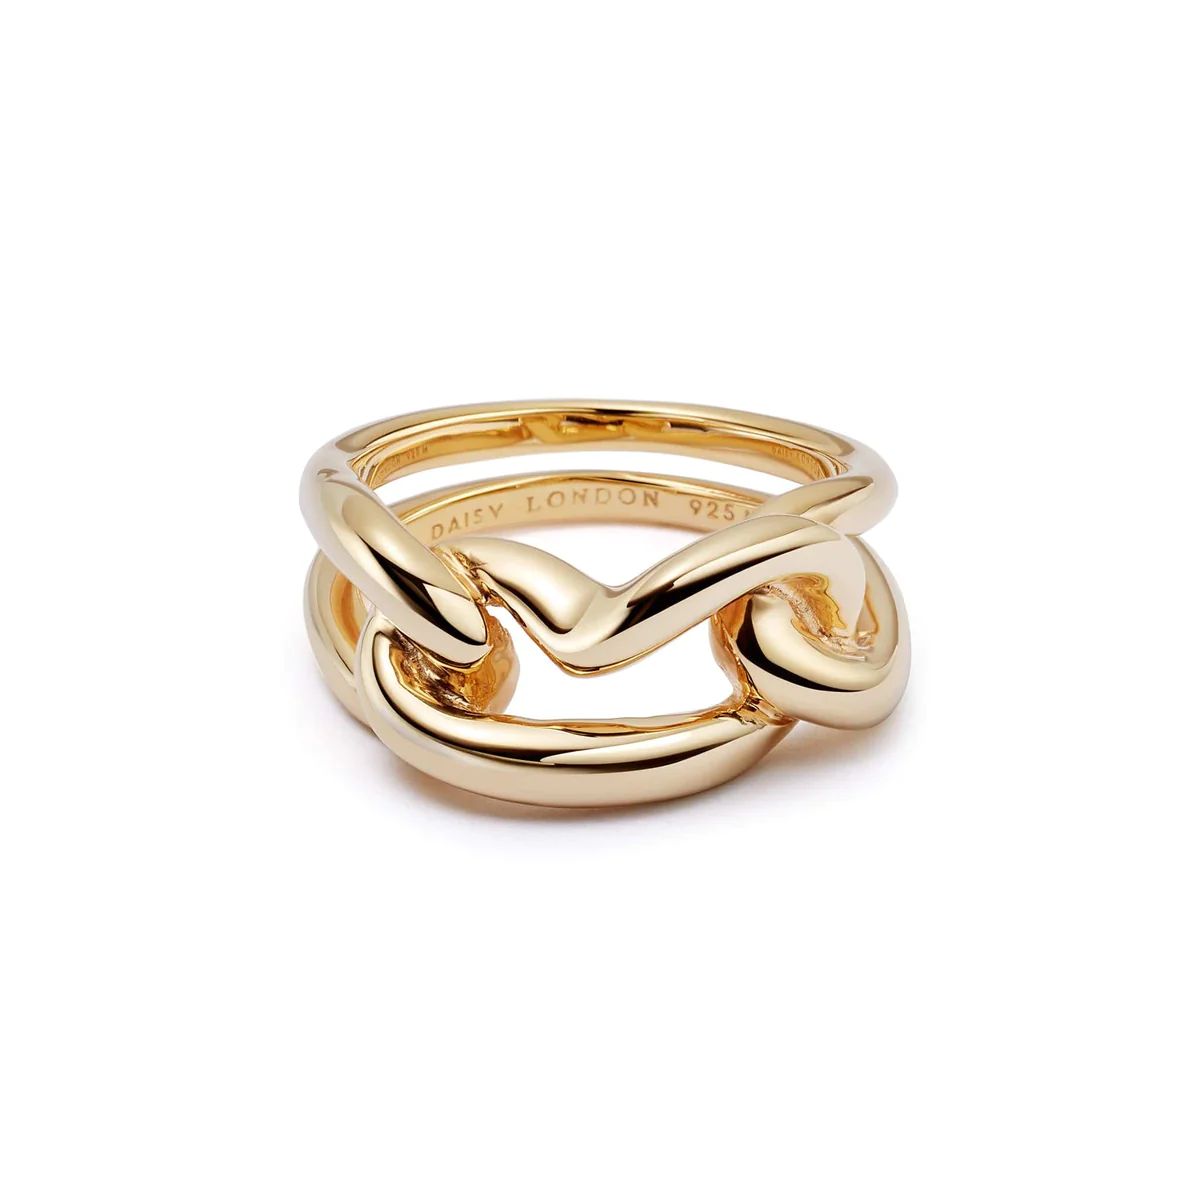 Polly Sayer Large Knot Chain Ring 18ct Gold Plate | Daisy London Jewellery